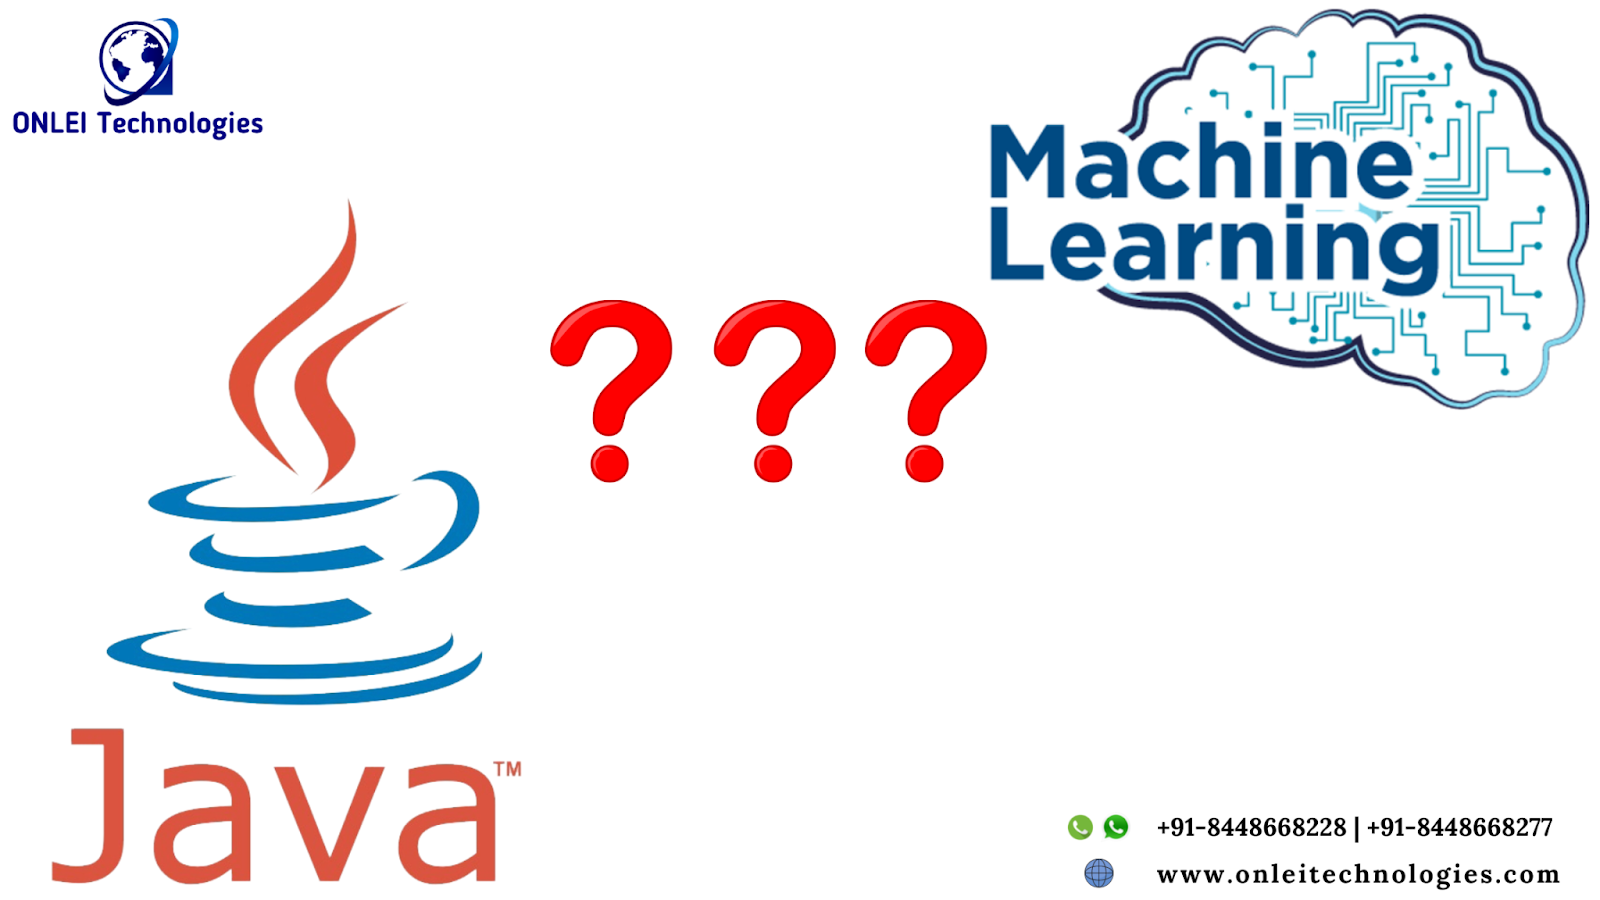 Can JAVA be used for Machine Learning / Artificial Intelligence ?